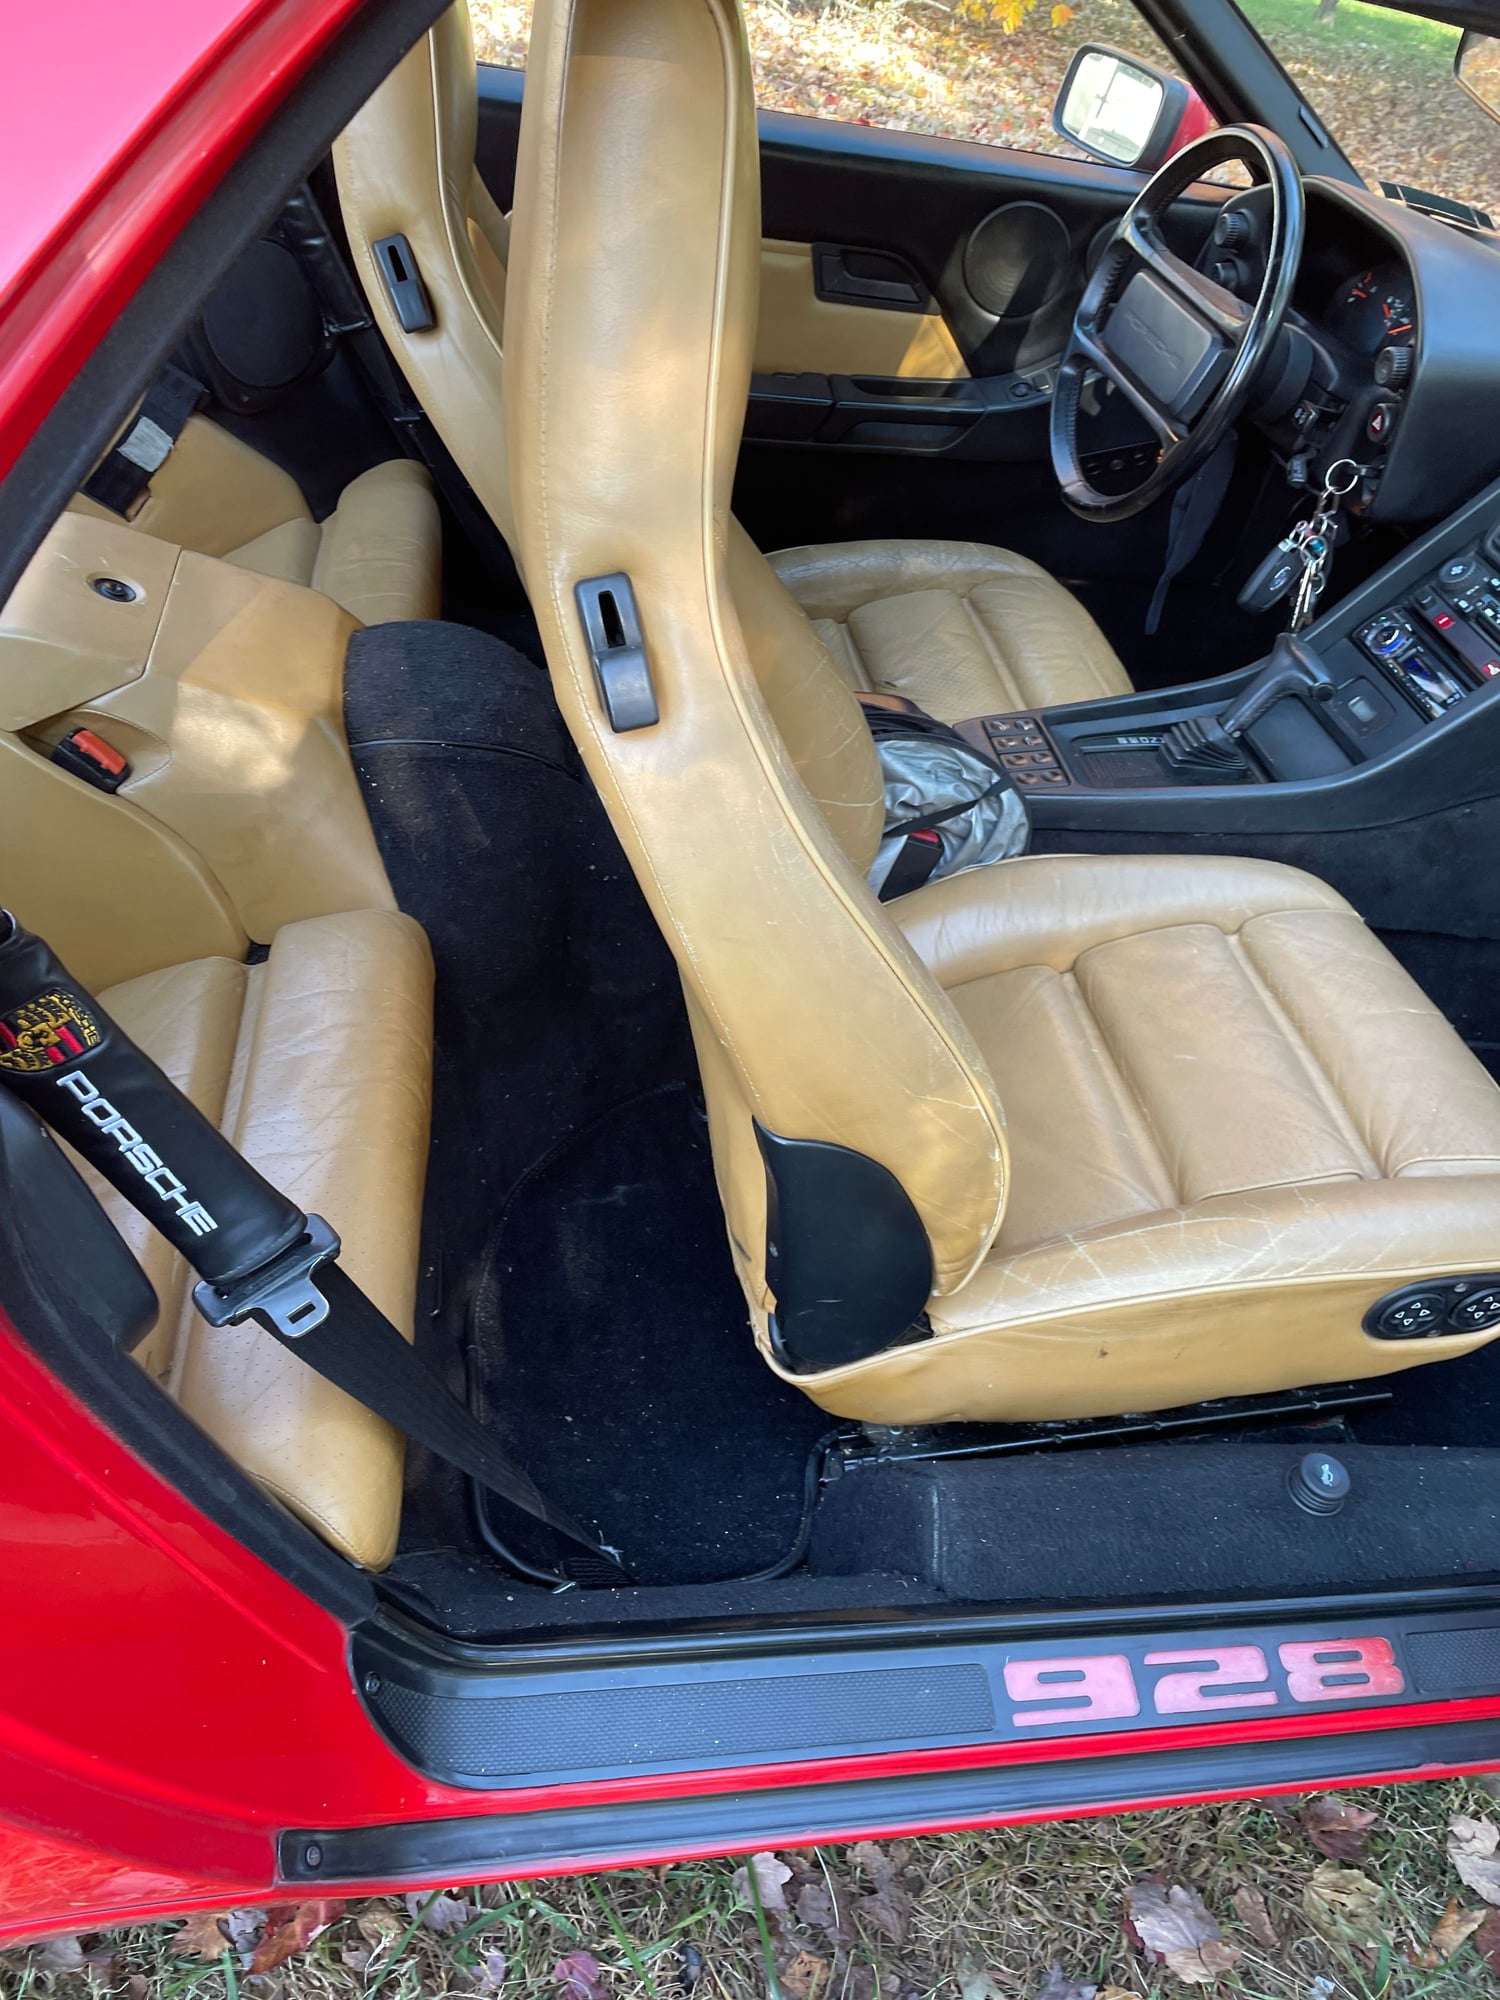 1987 Porsche 928 - 1987 Red Porsche 928 Auto - Used - VIN wp0jb0928hs860344 - 175,000 Miles - 8 cyl - 2WD - Automatic - Coupe - Red - California, MD 20619, United States